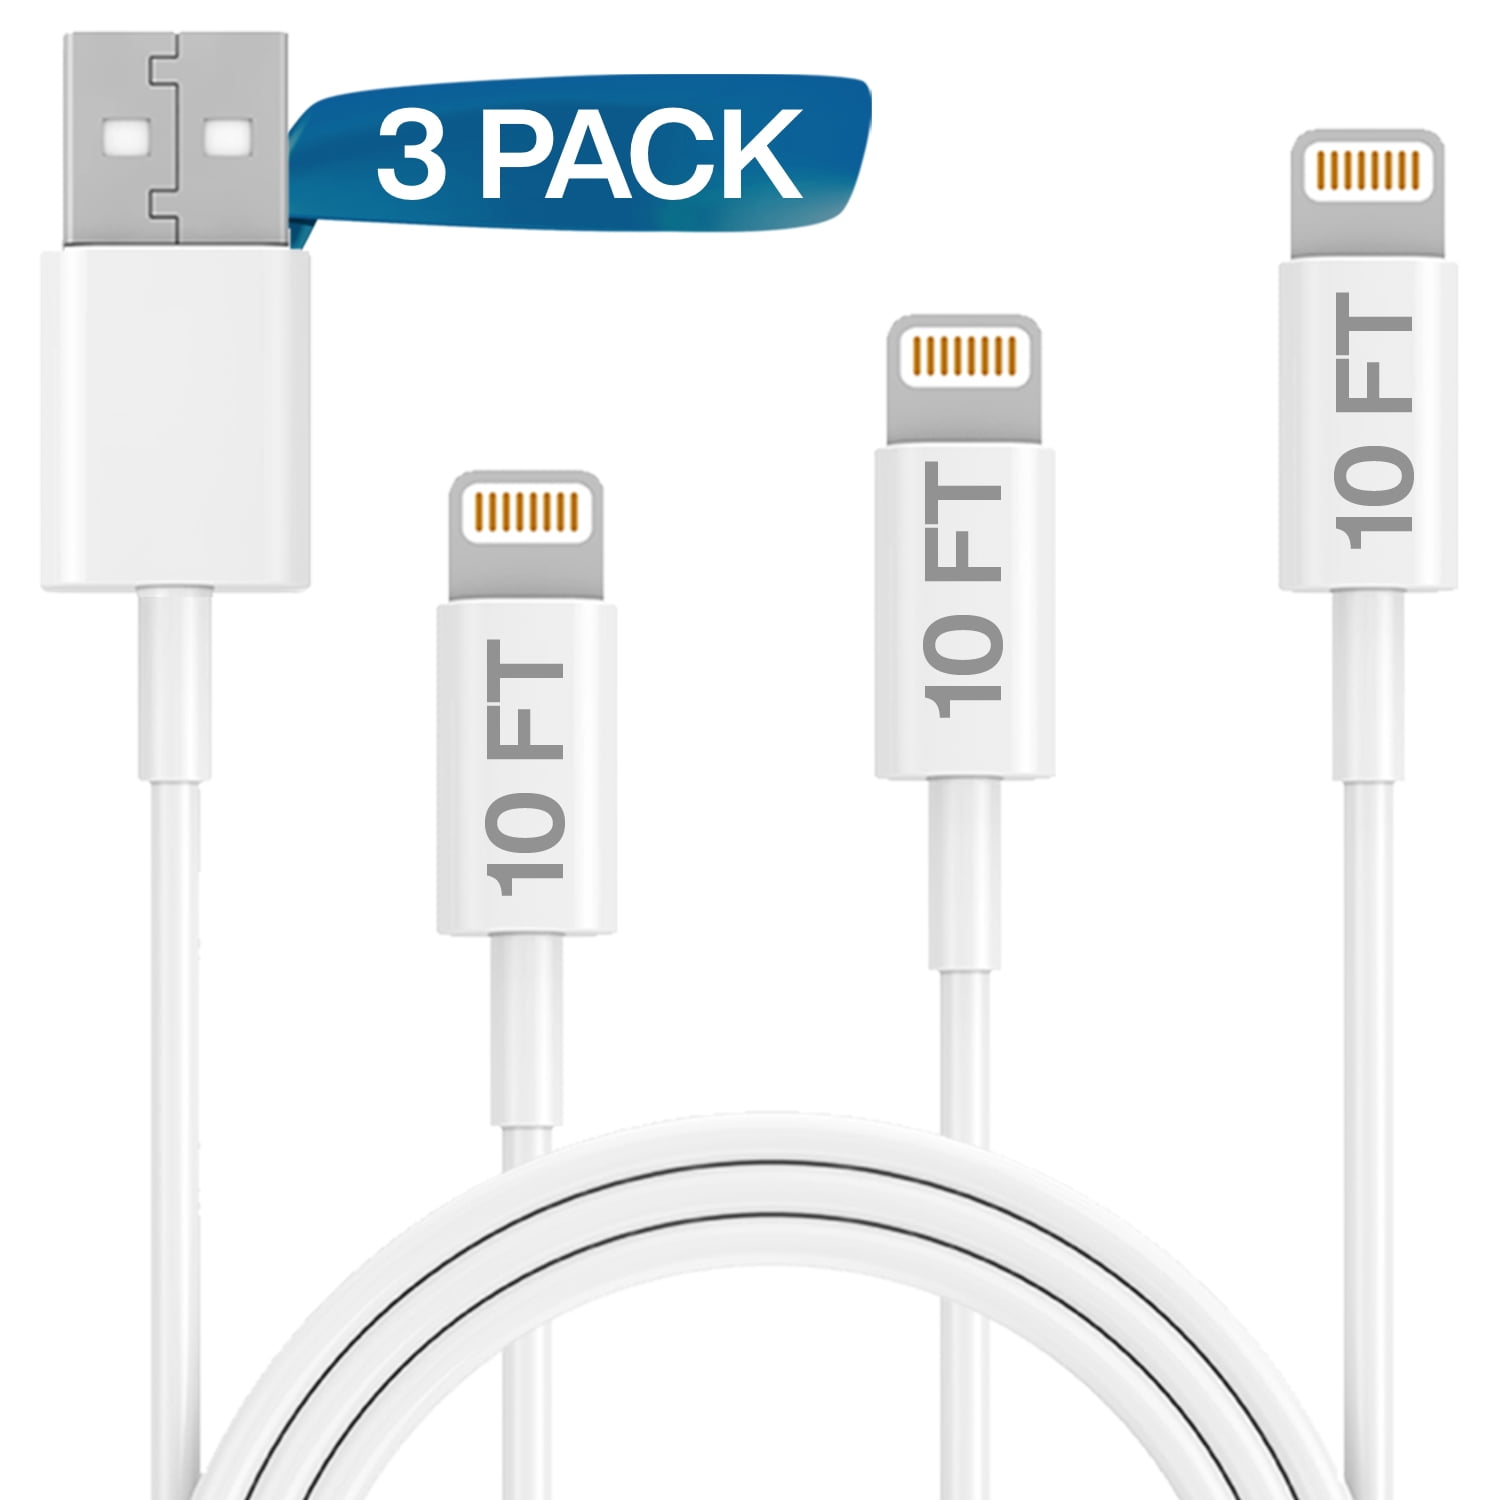 Extra Long Nylon Braided USB Charging & Syncing Cord Compatible iPhone Xs/Xs Max/XR/X/8/8Plus/7/7Plus/6S/6S Plus/SE/iPad/iPod and More iPhone Charger,MFi Certified Lightning Cable 4 Pack 6 FT 